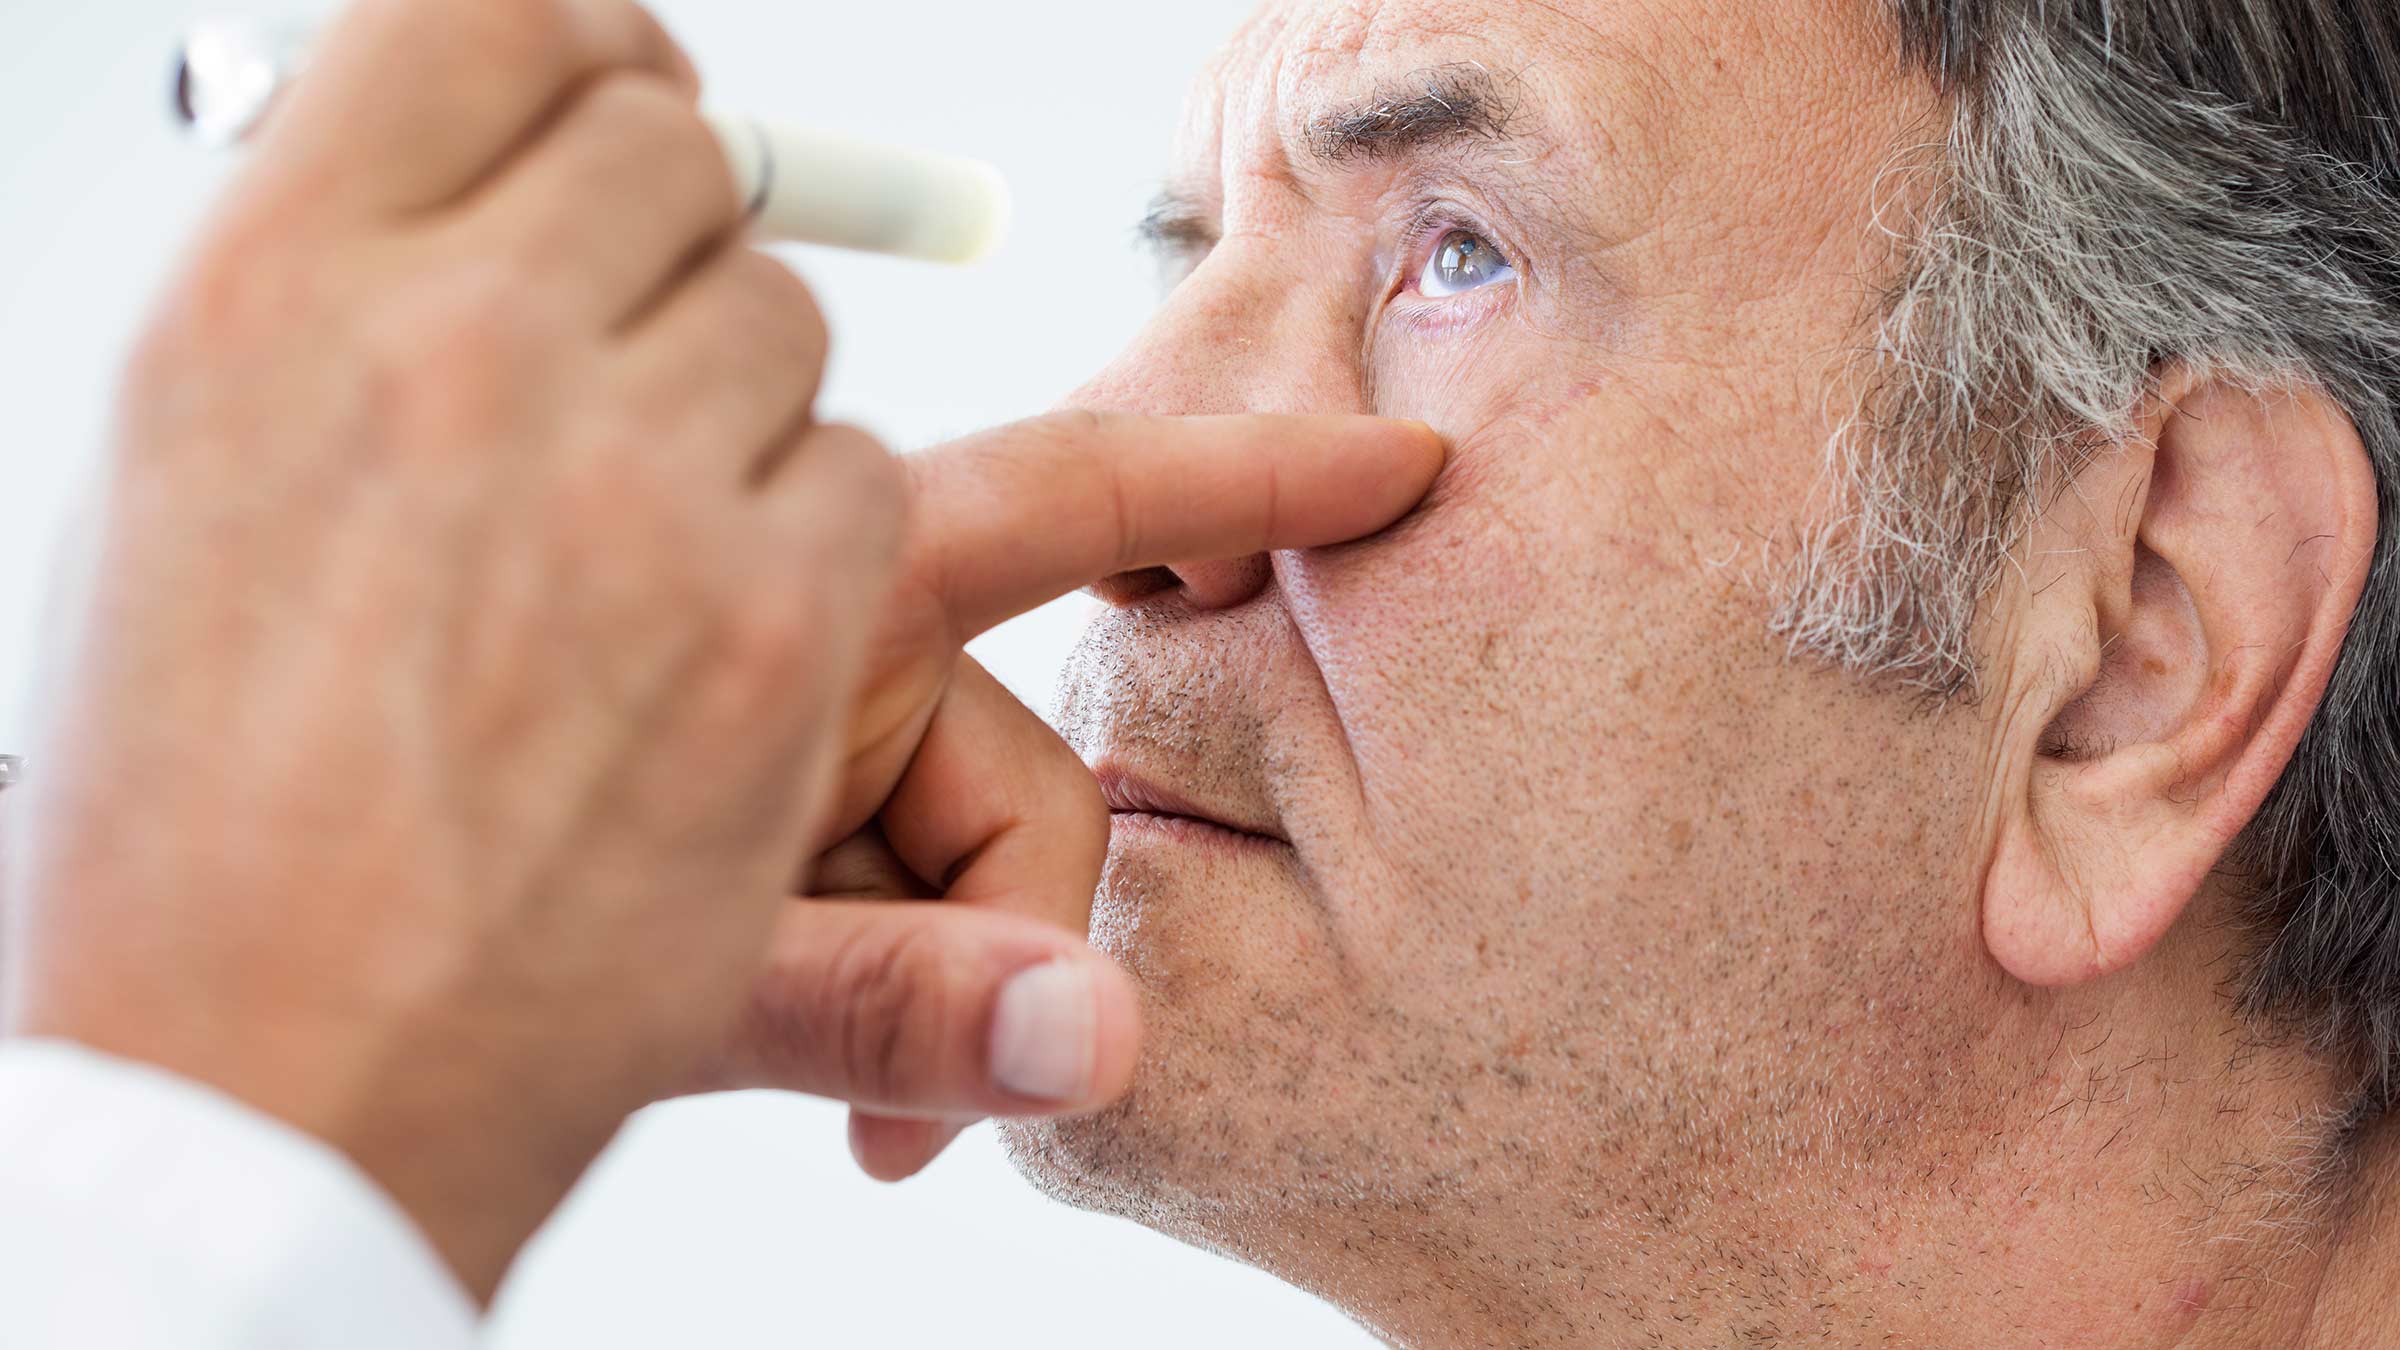 Senior-age man being examined by an eye doctor, who shines a light in one of his eyes